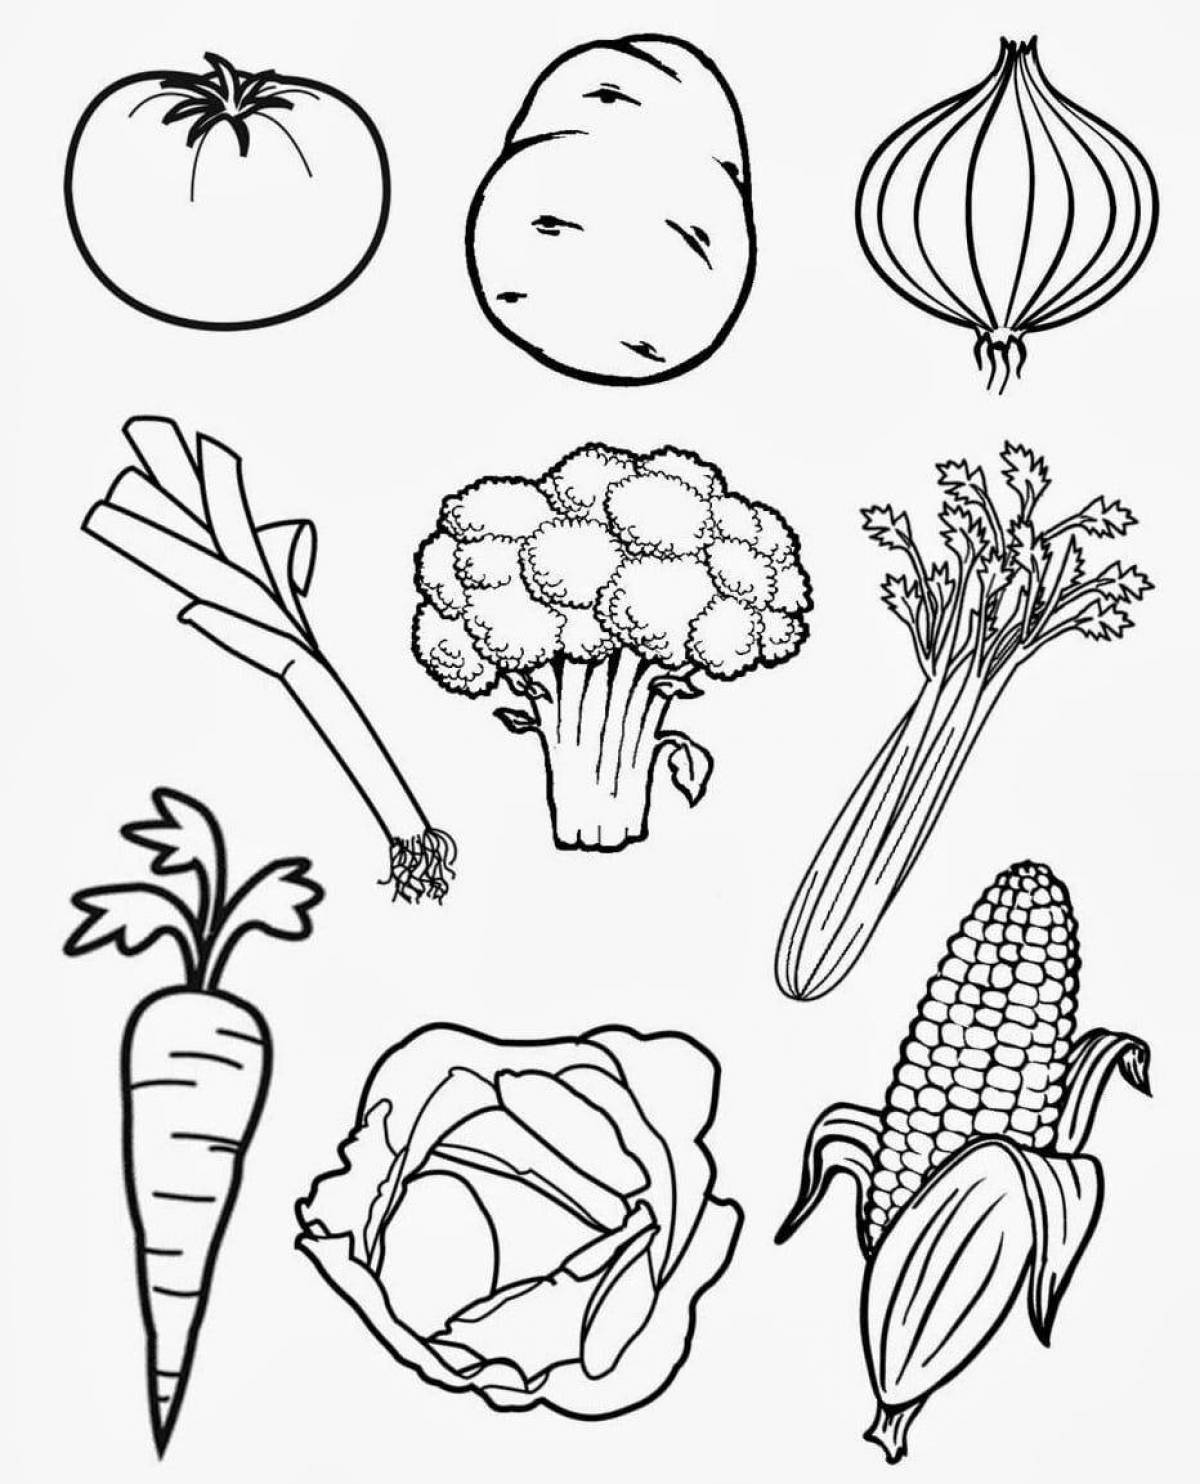 Fun coloring of vegetables for children 6-7 years old